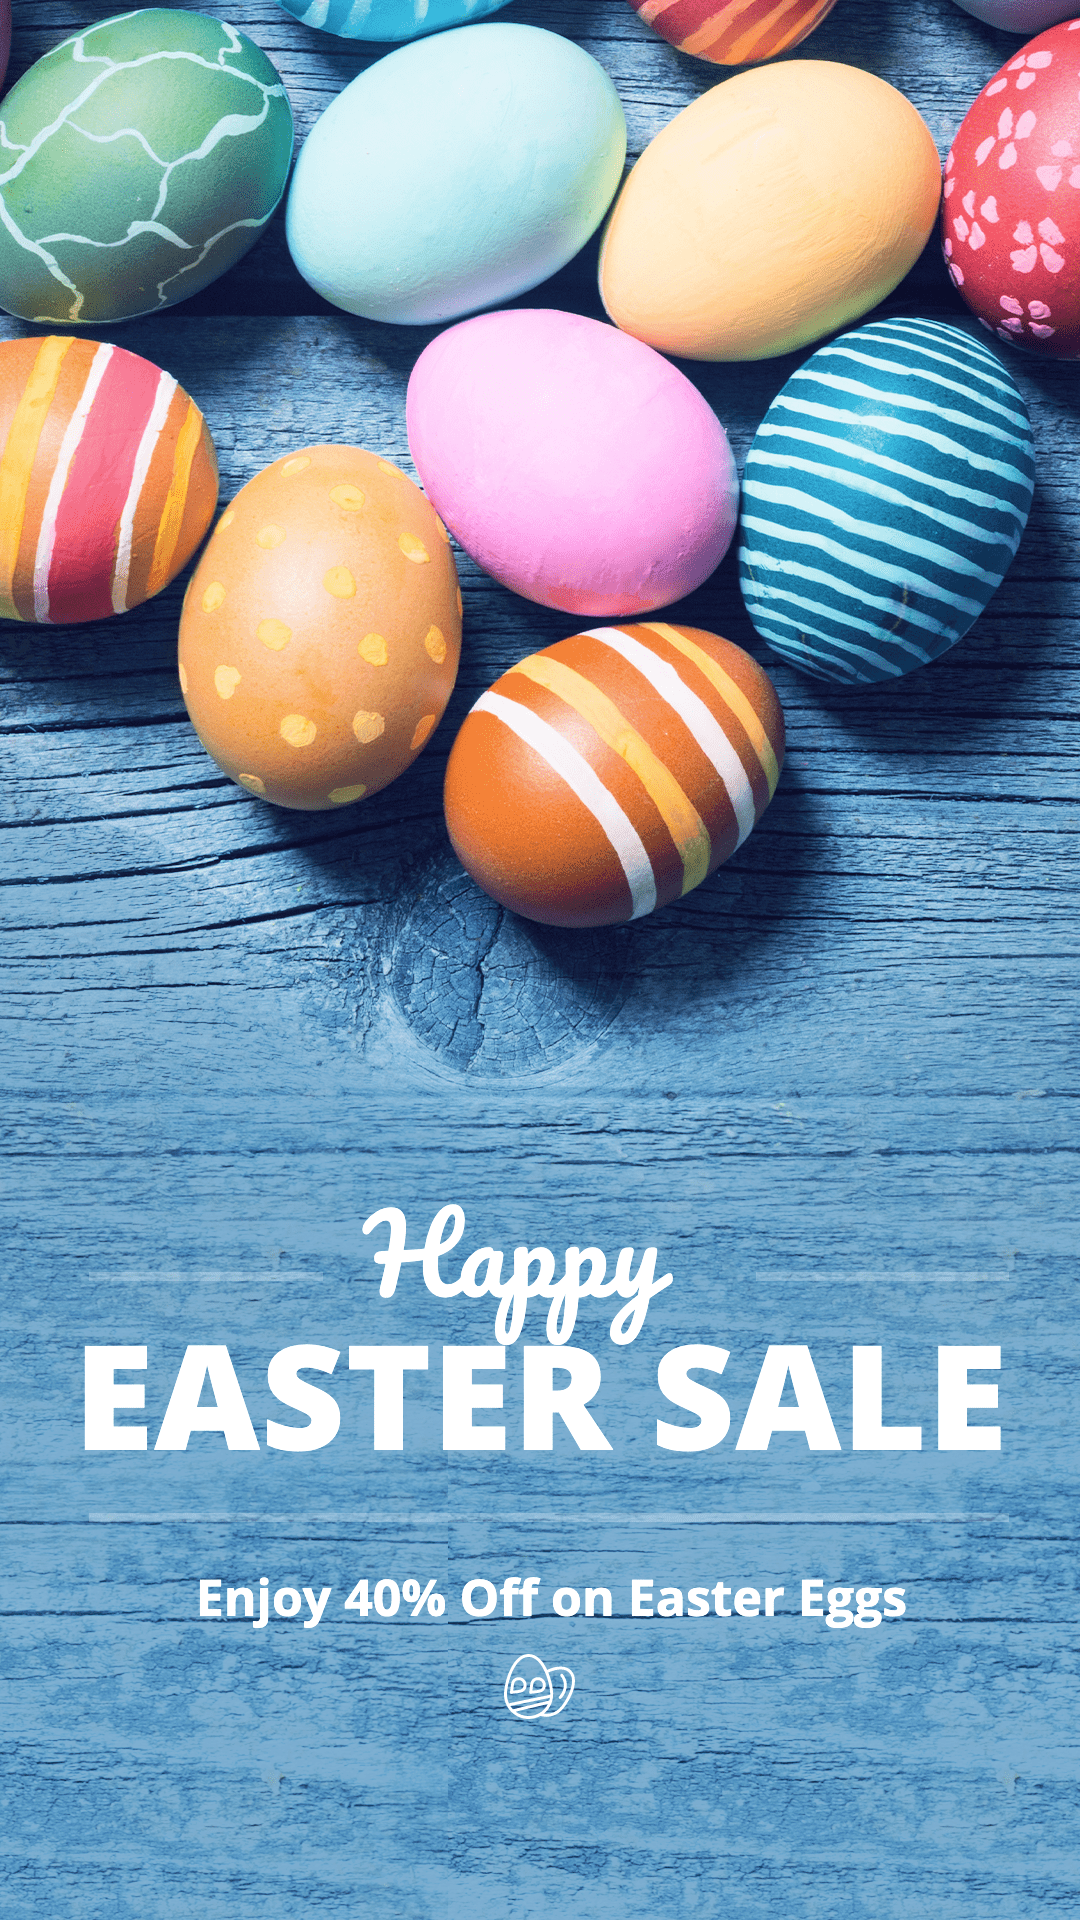 Blue Wood Background Easter Egg Home Decorations Sale Promotion Ecommerce Story预览效果